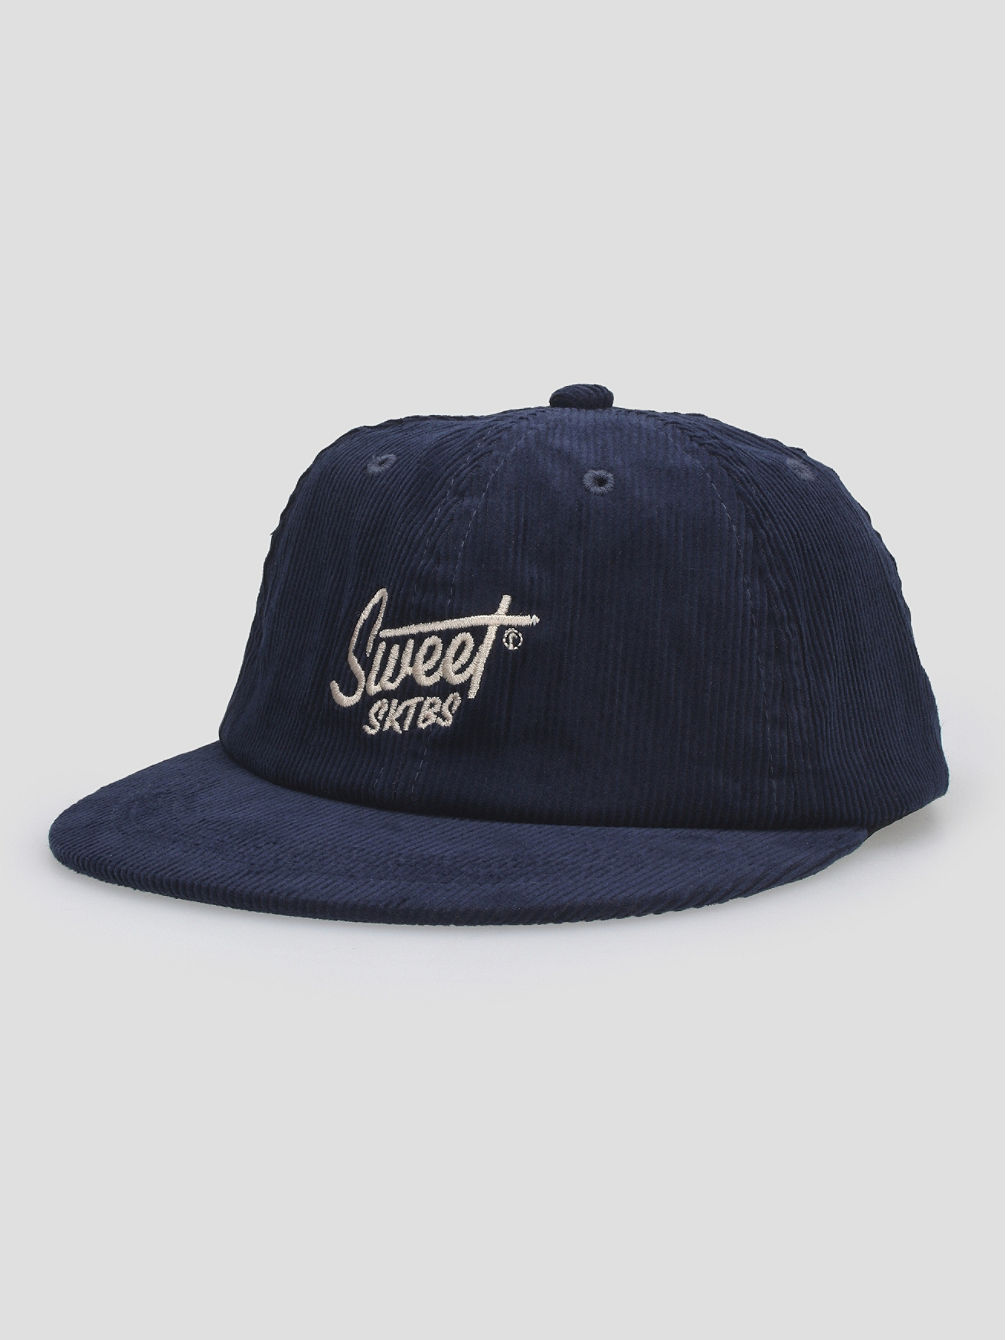 Sweet Cord Casquette